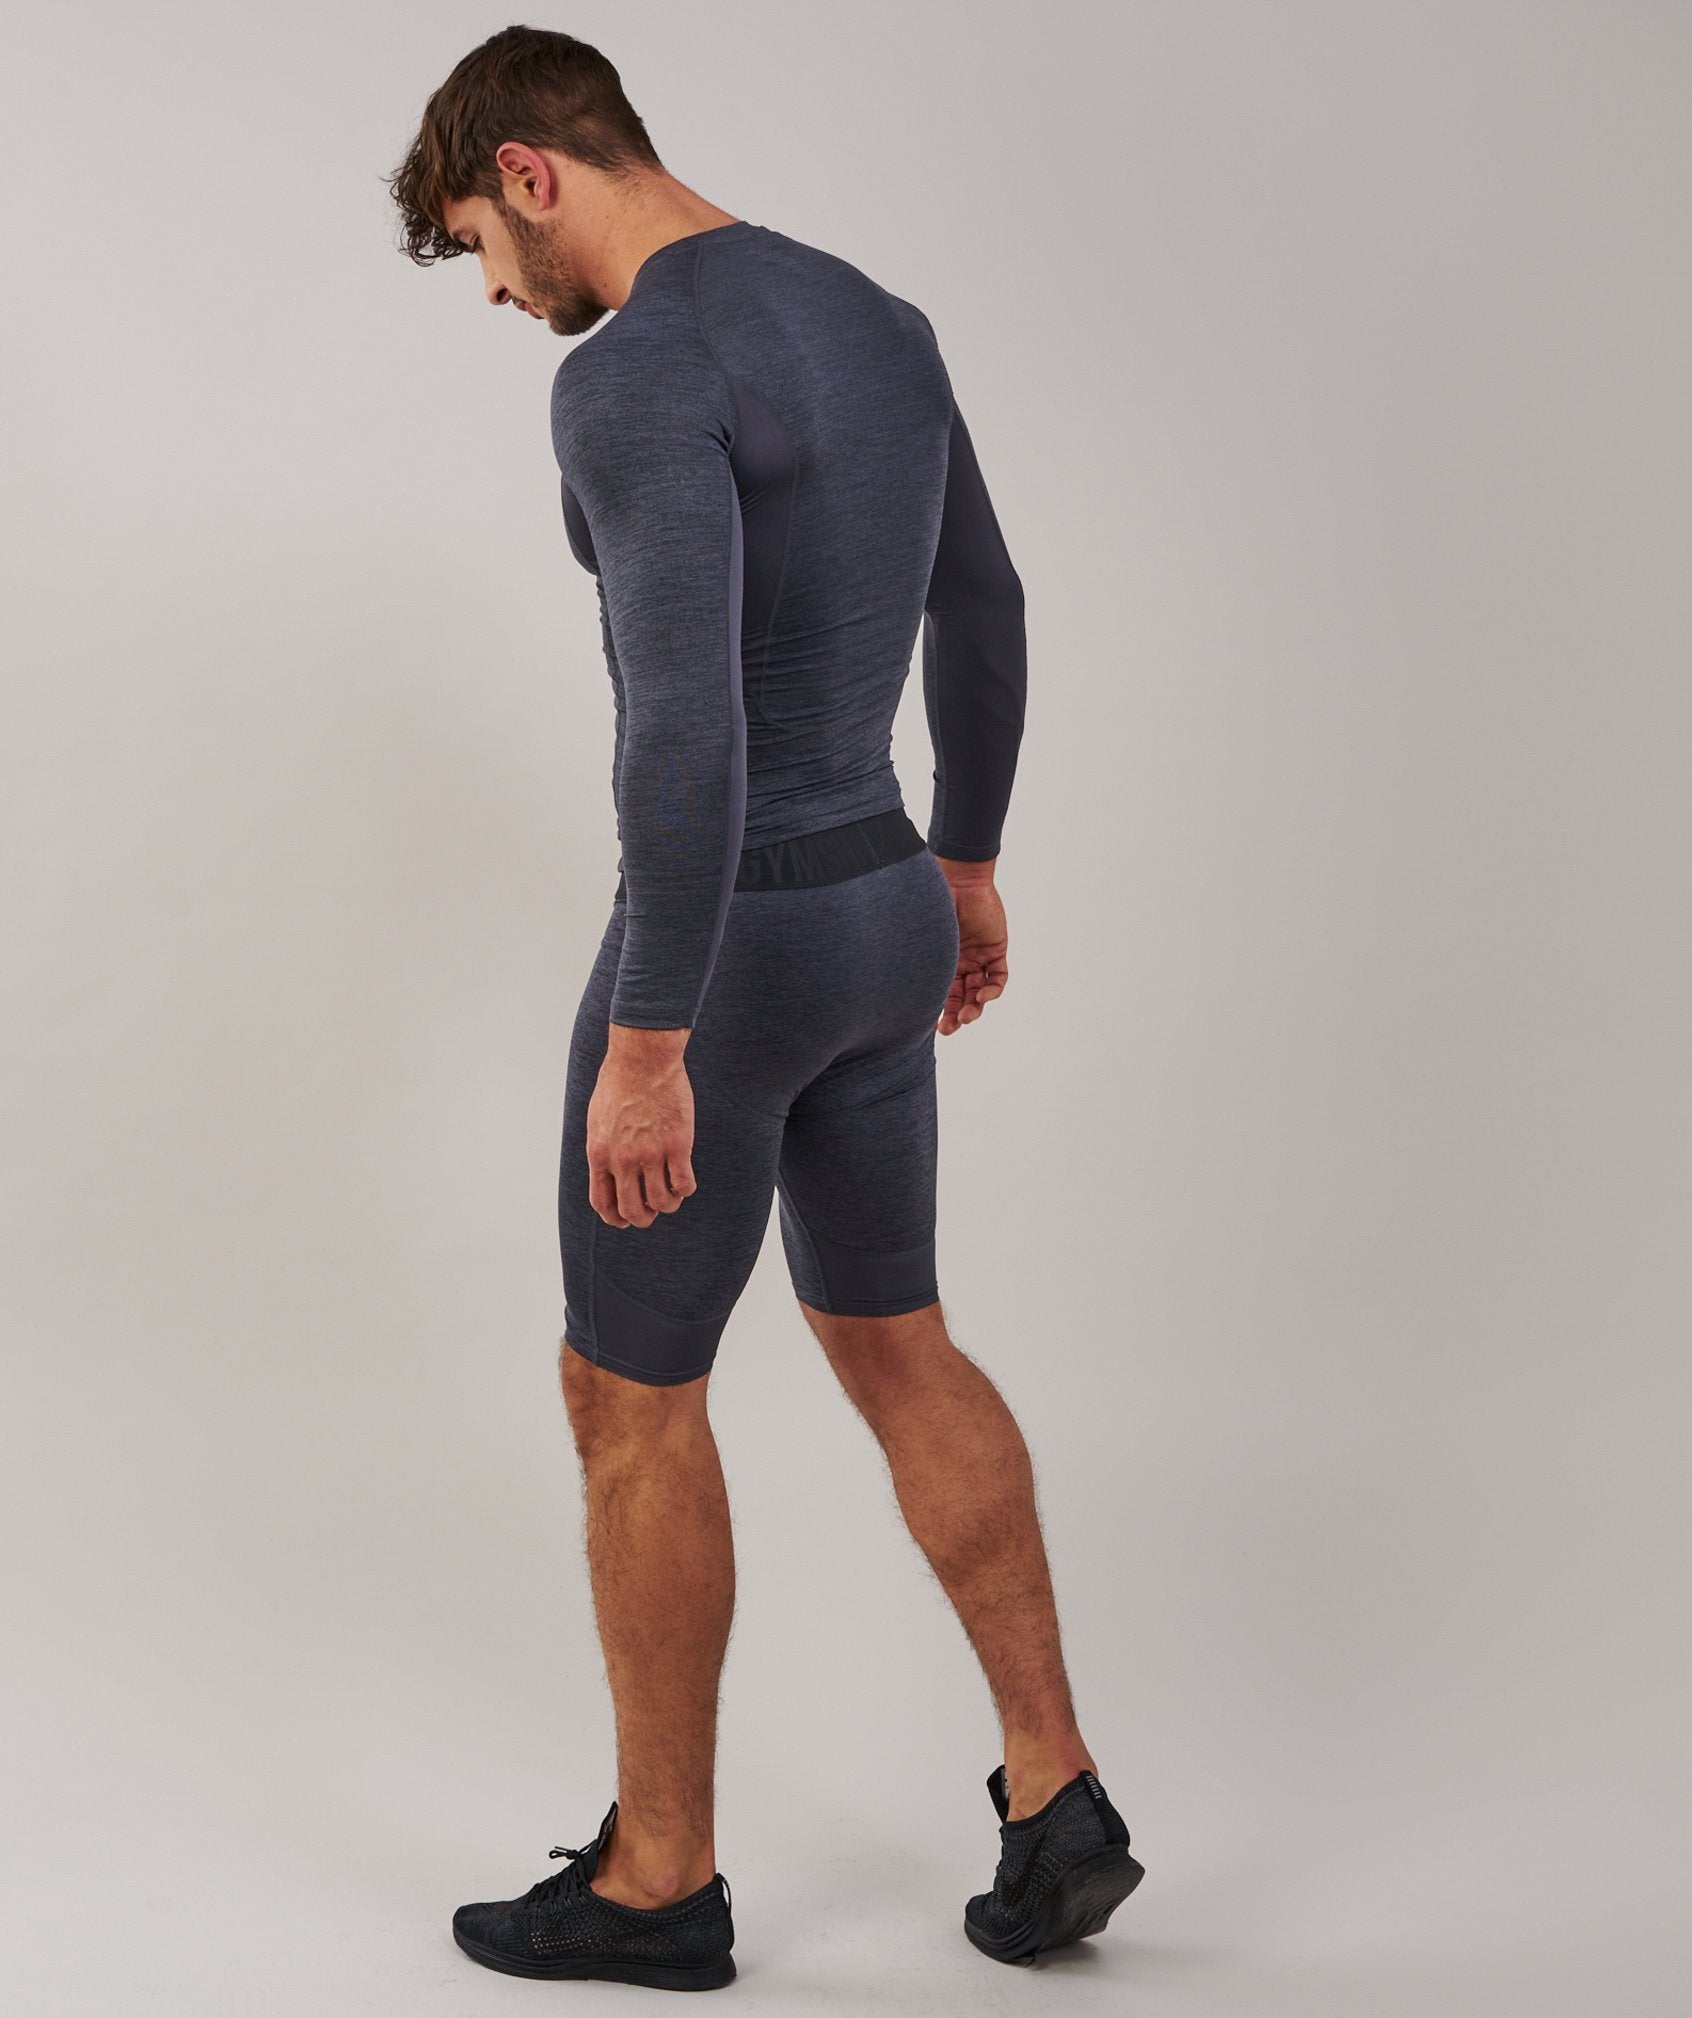 Element Baselayer Shorts in Charcoal Marl - view 3